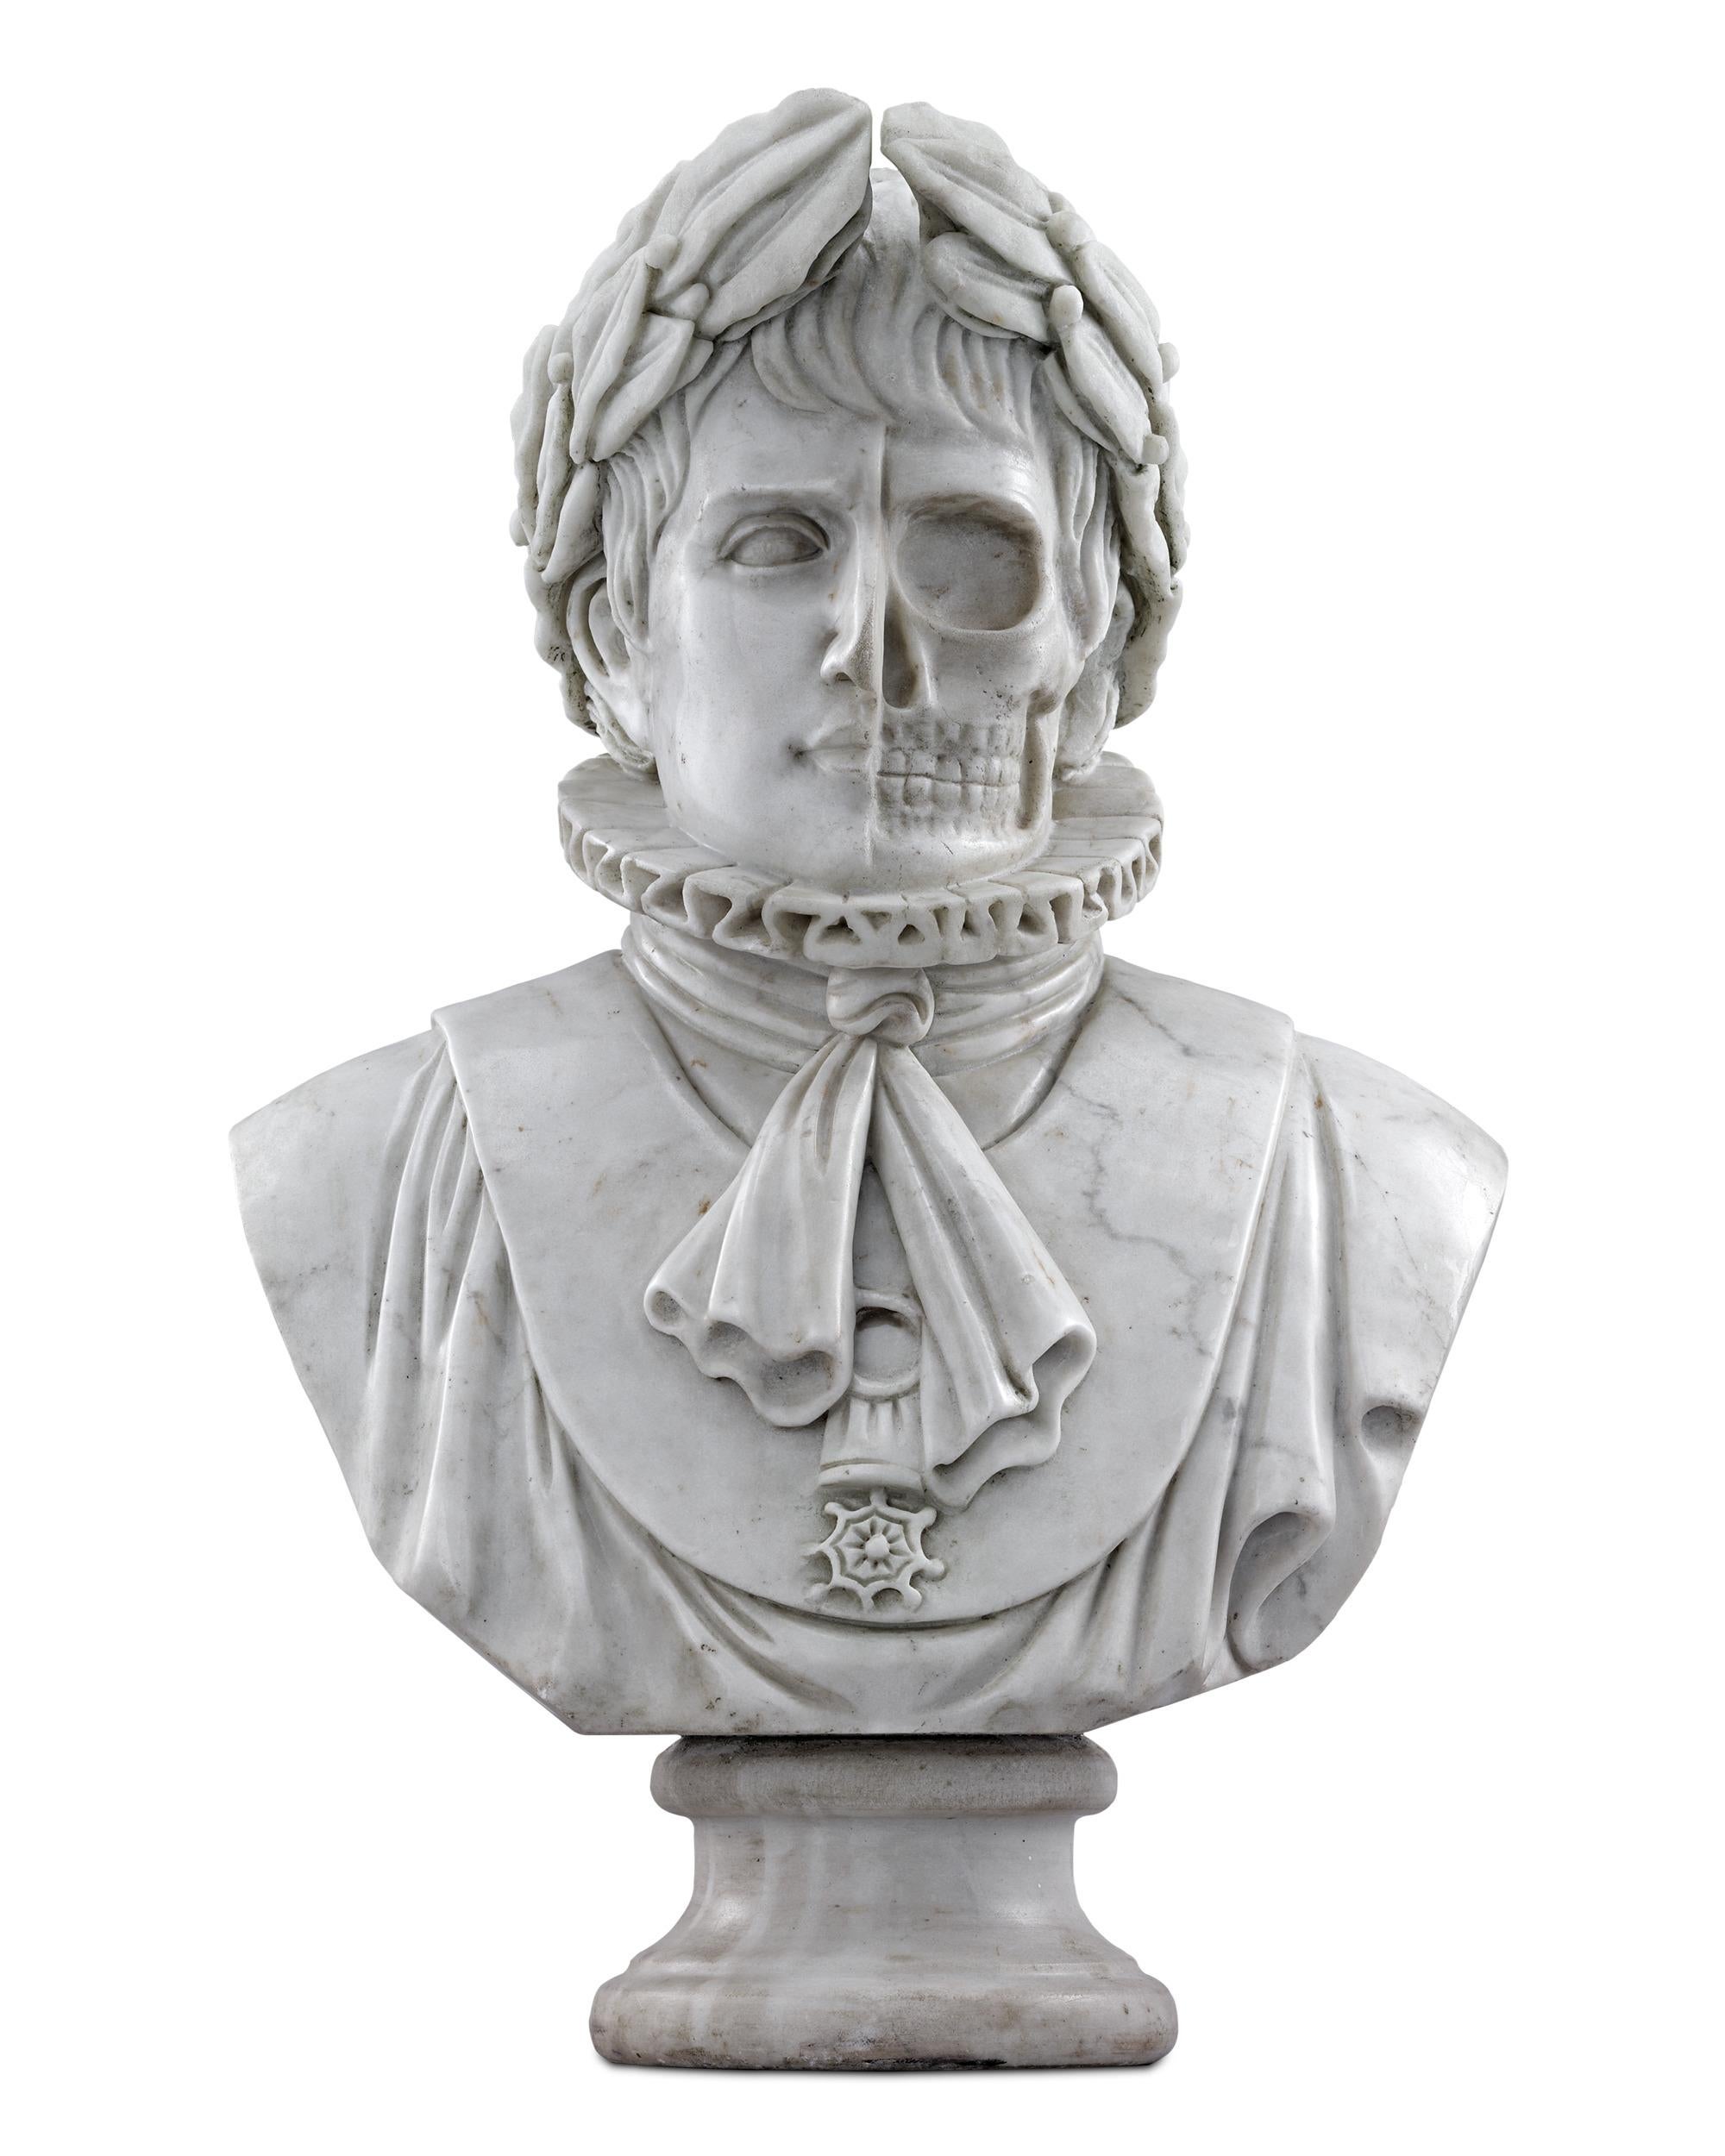 Unknown Figurative Sculpture - Sculpture of Napoleon in Life and Death